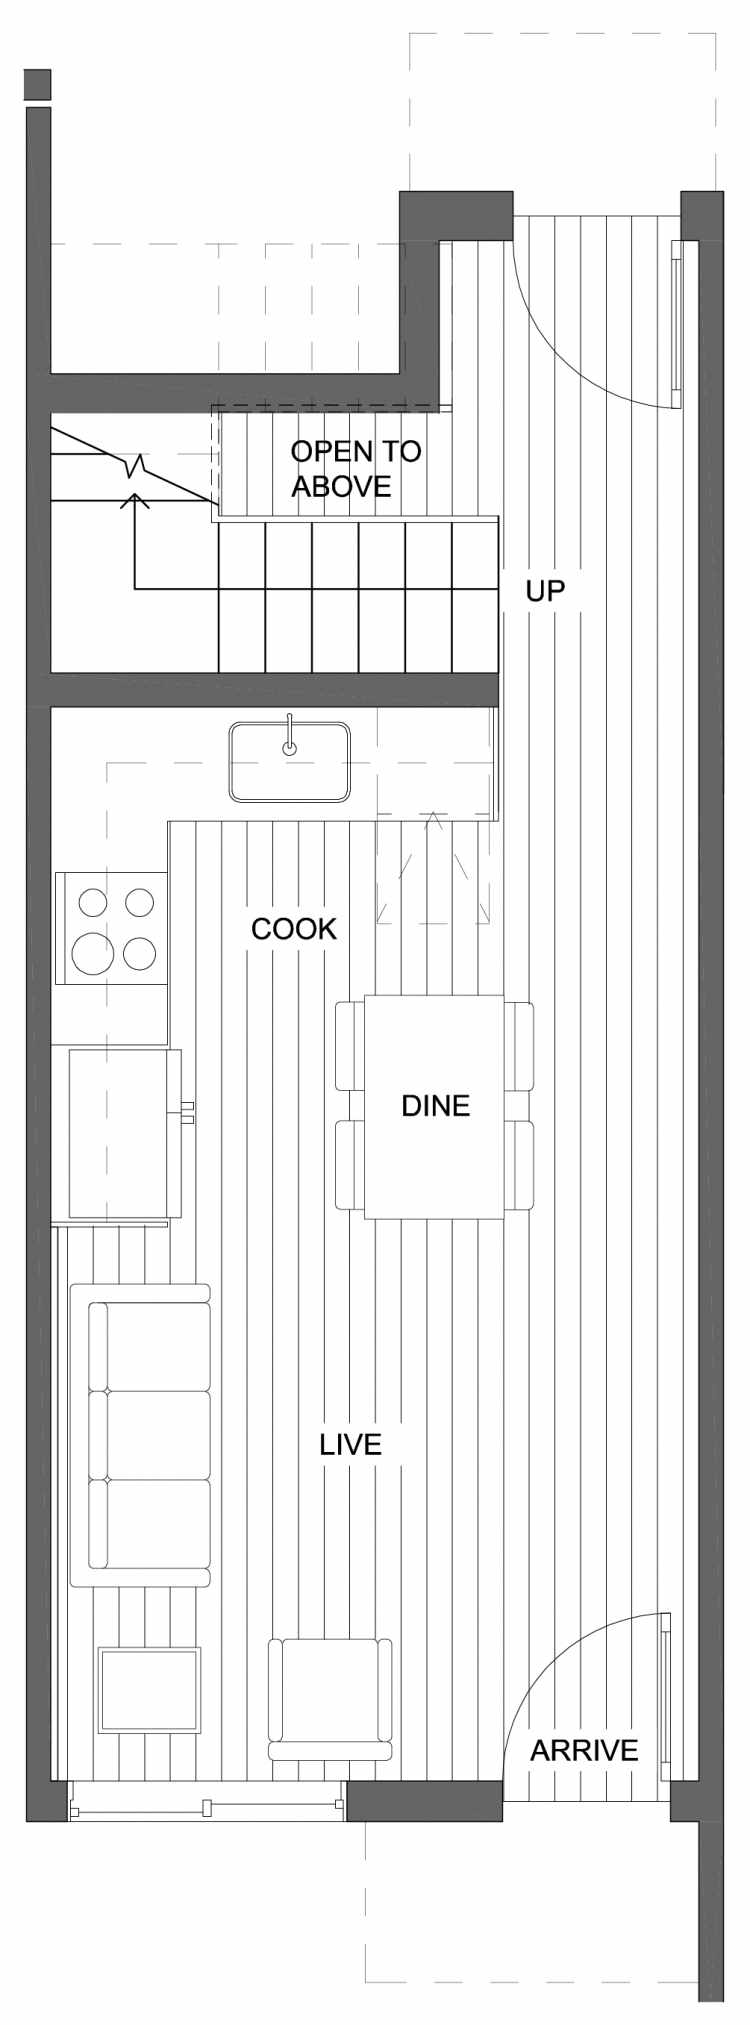 First Floor Plan of 10425 Alderbrook Pl NW, One of the Zinnia Townhomes in the Greenwood Neighborhood of Seattle